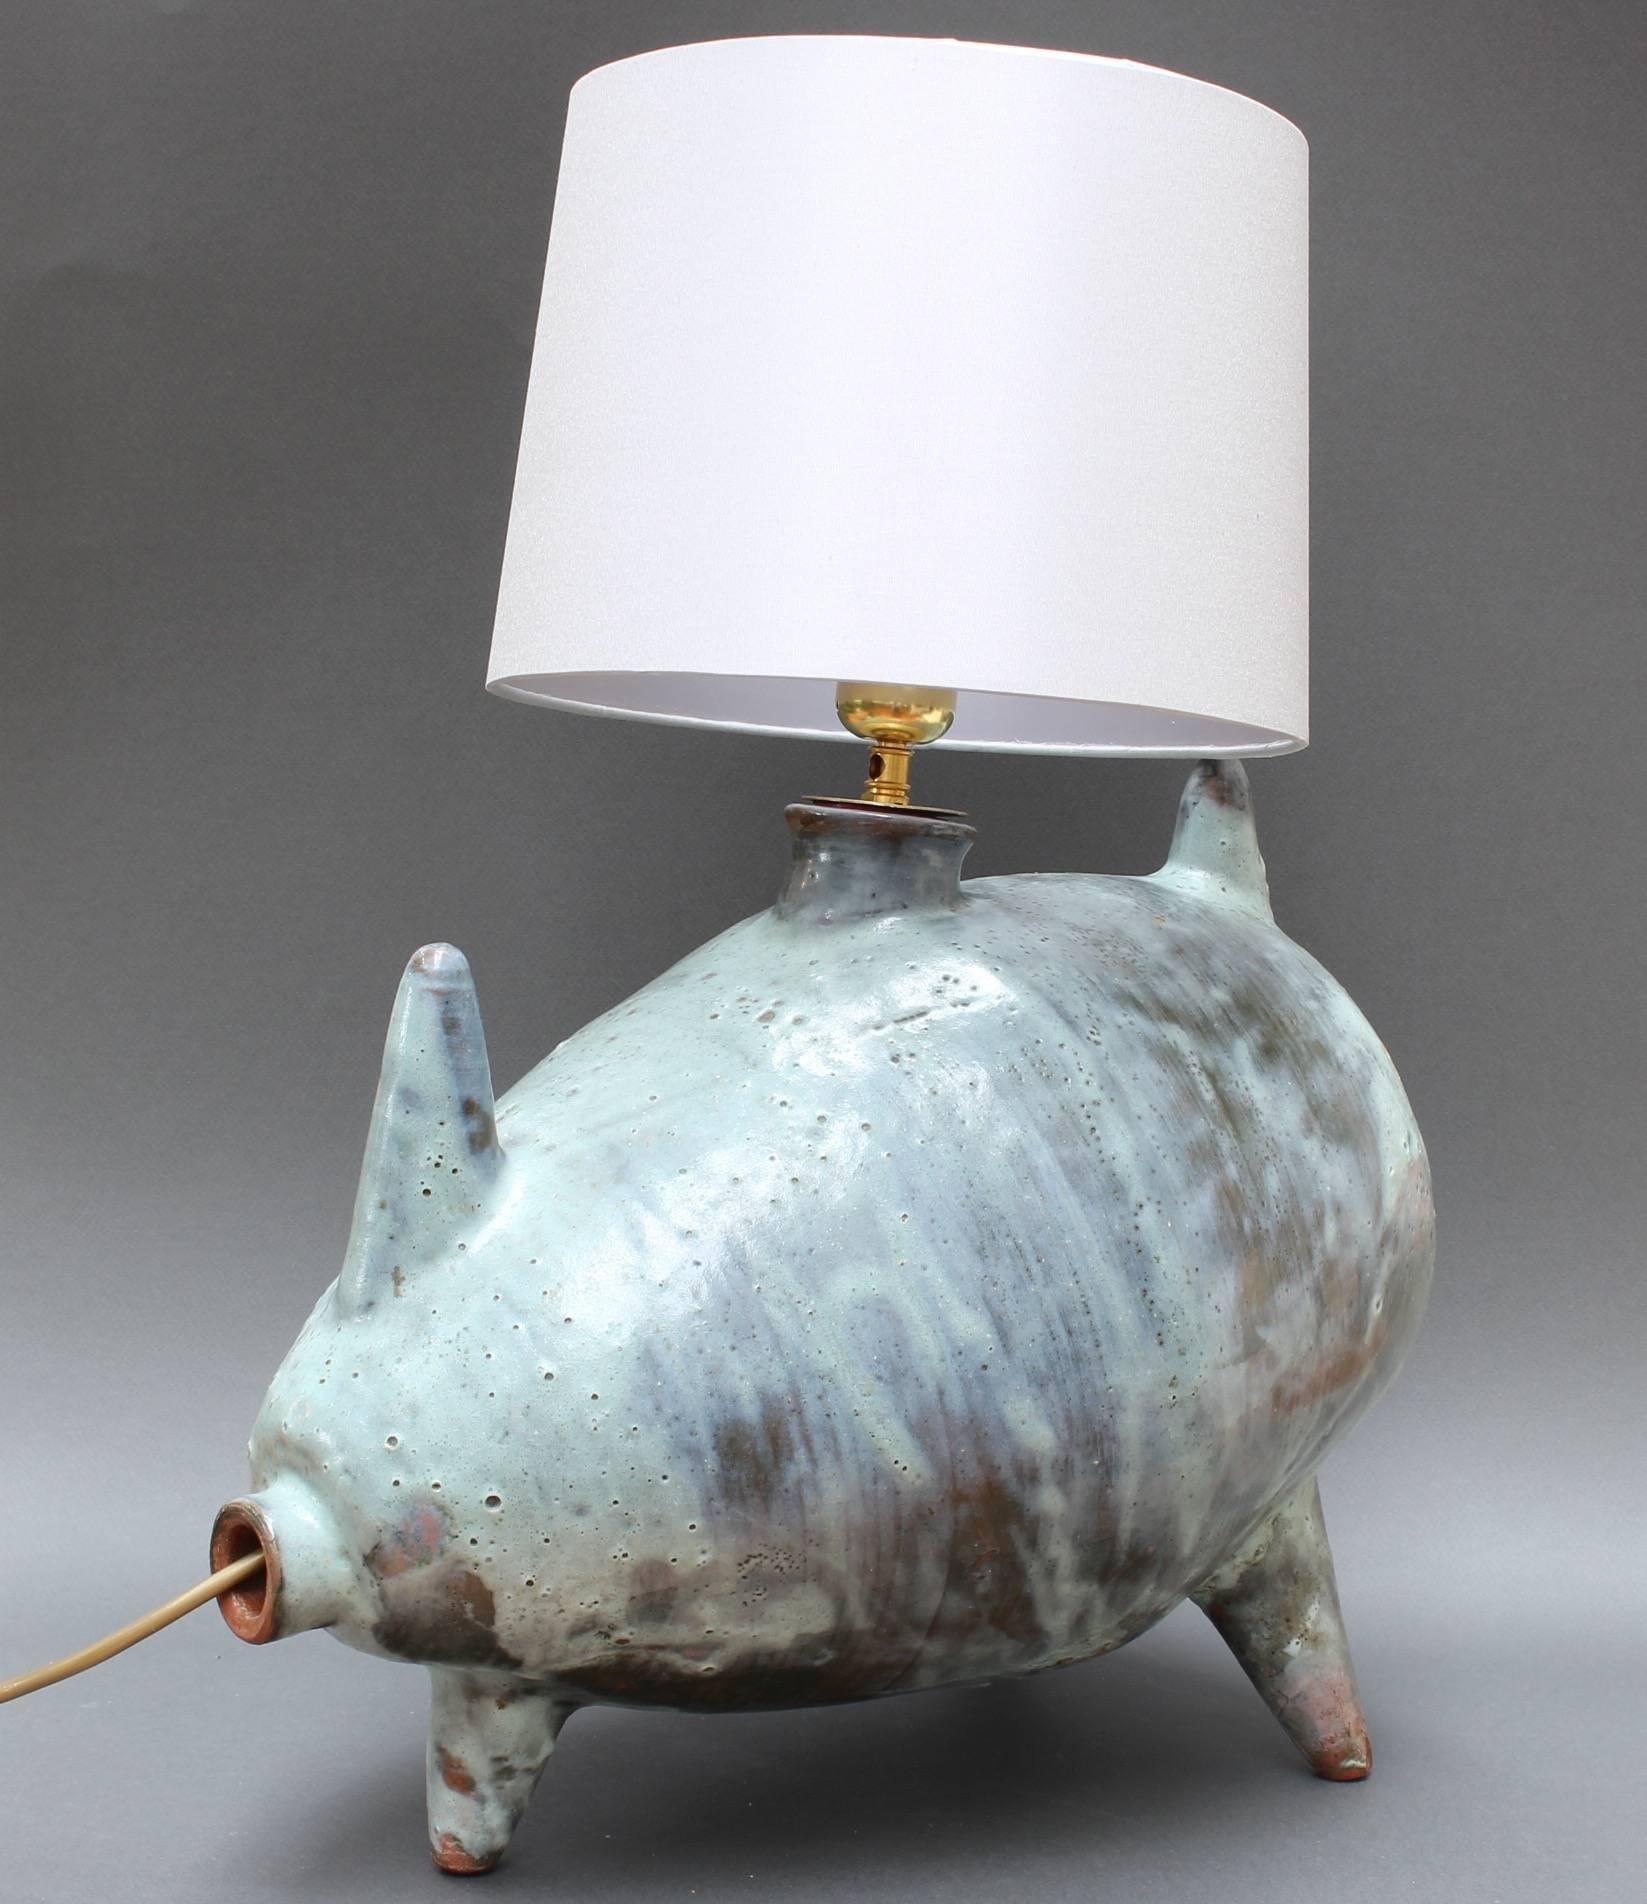 Porcine ceramic table lamp, (circa 1960s). A very tactile and visually intriguing glazed ceramic porcine table lamp on three legs - an instant conversation piece. The Verdigris matte finish will complement your spaces' colour schemes and the size